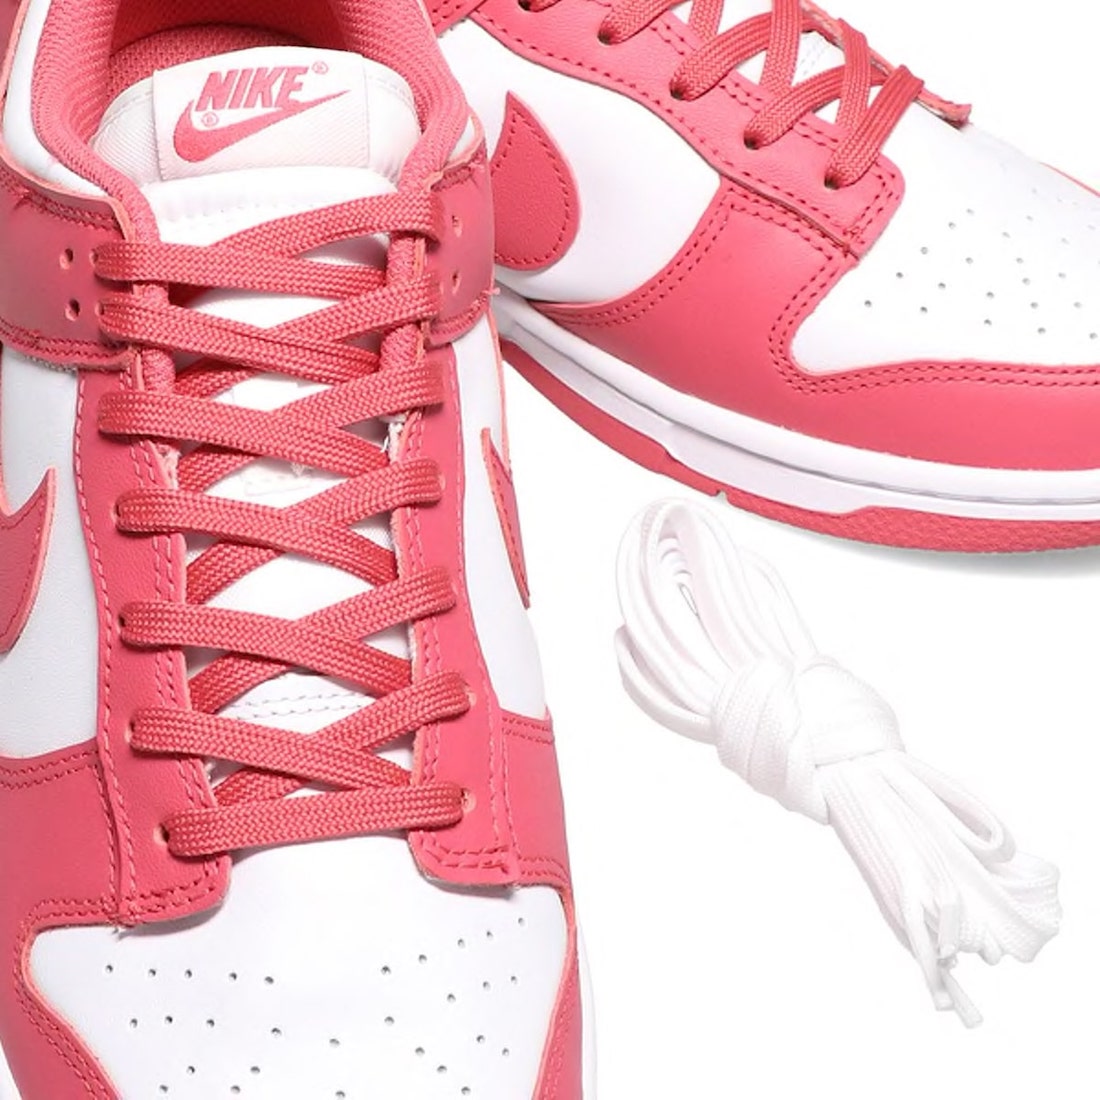 2021 Nike Dunk Low Archeo Pink DD1503 111 Release Date 6